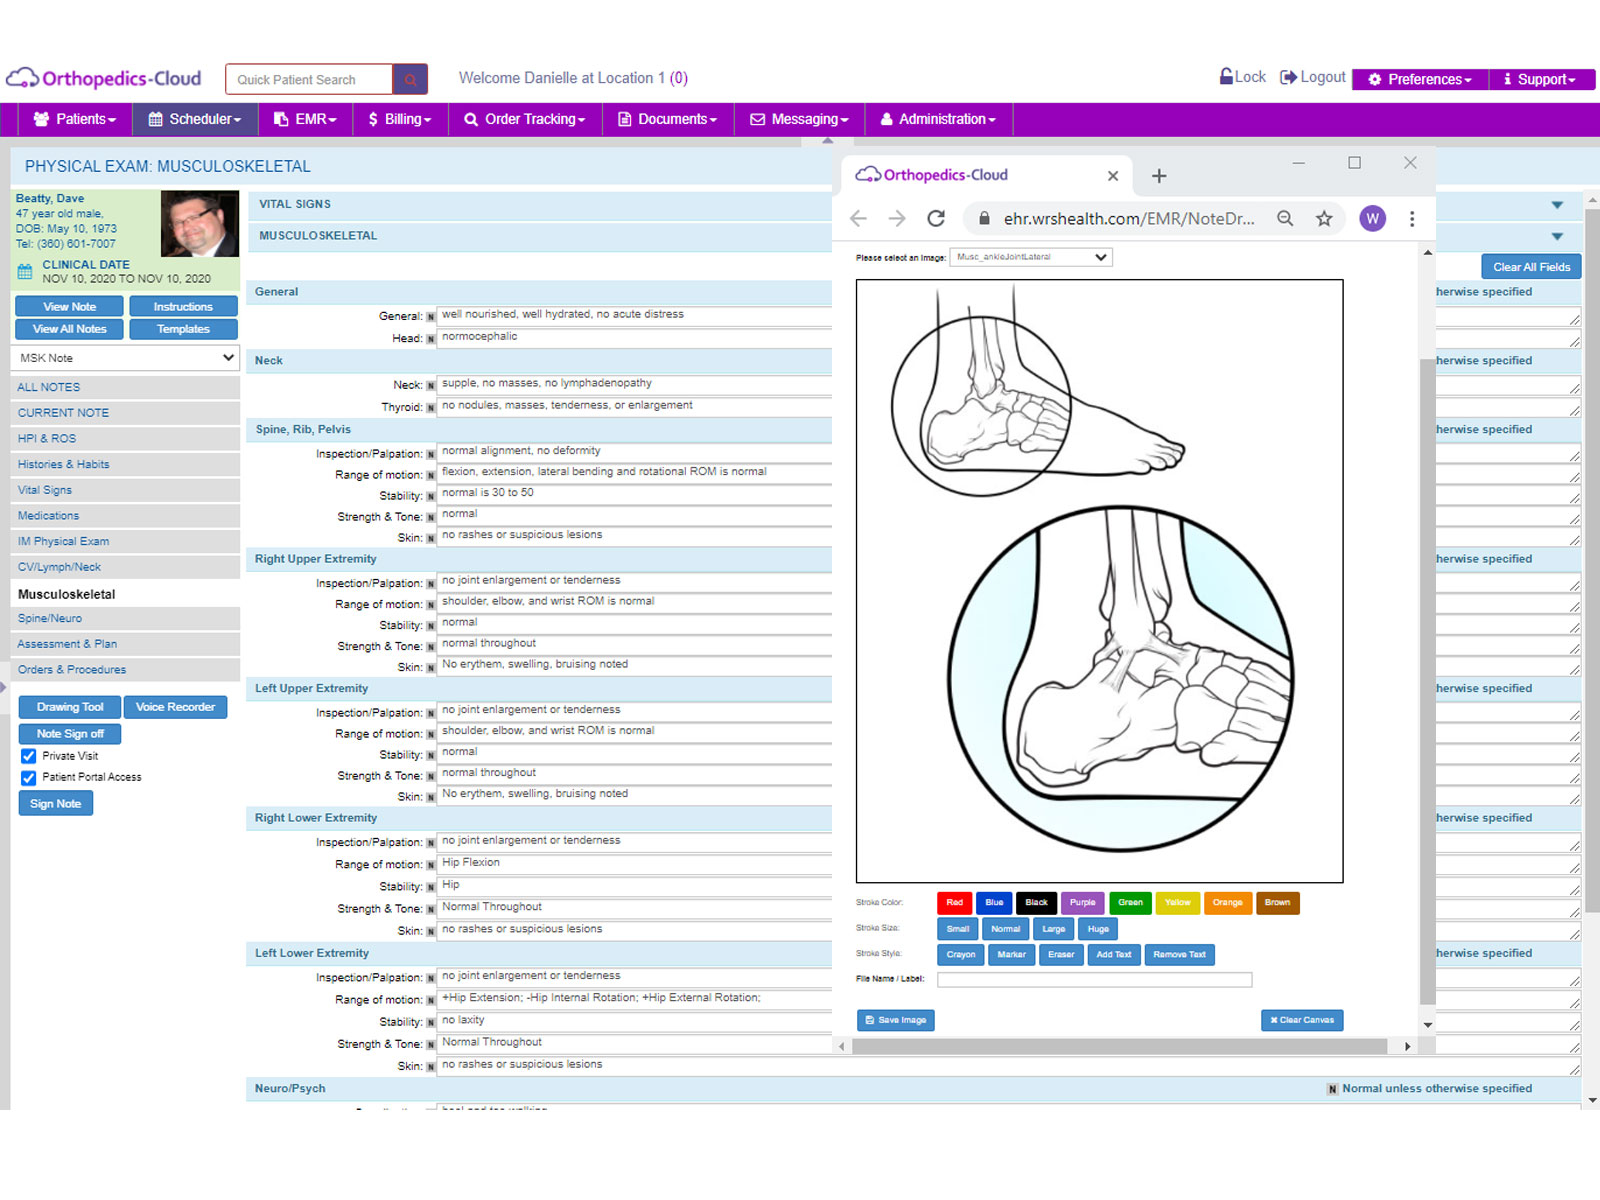 Musculoskeletal Note template in Orthopedics-Cloud